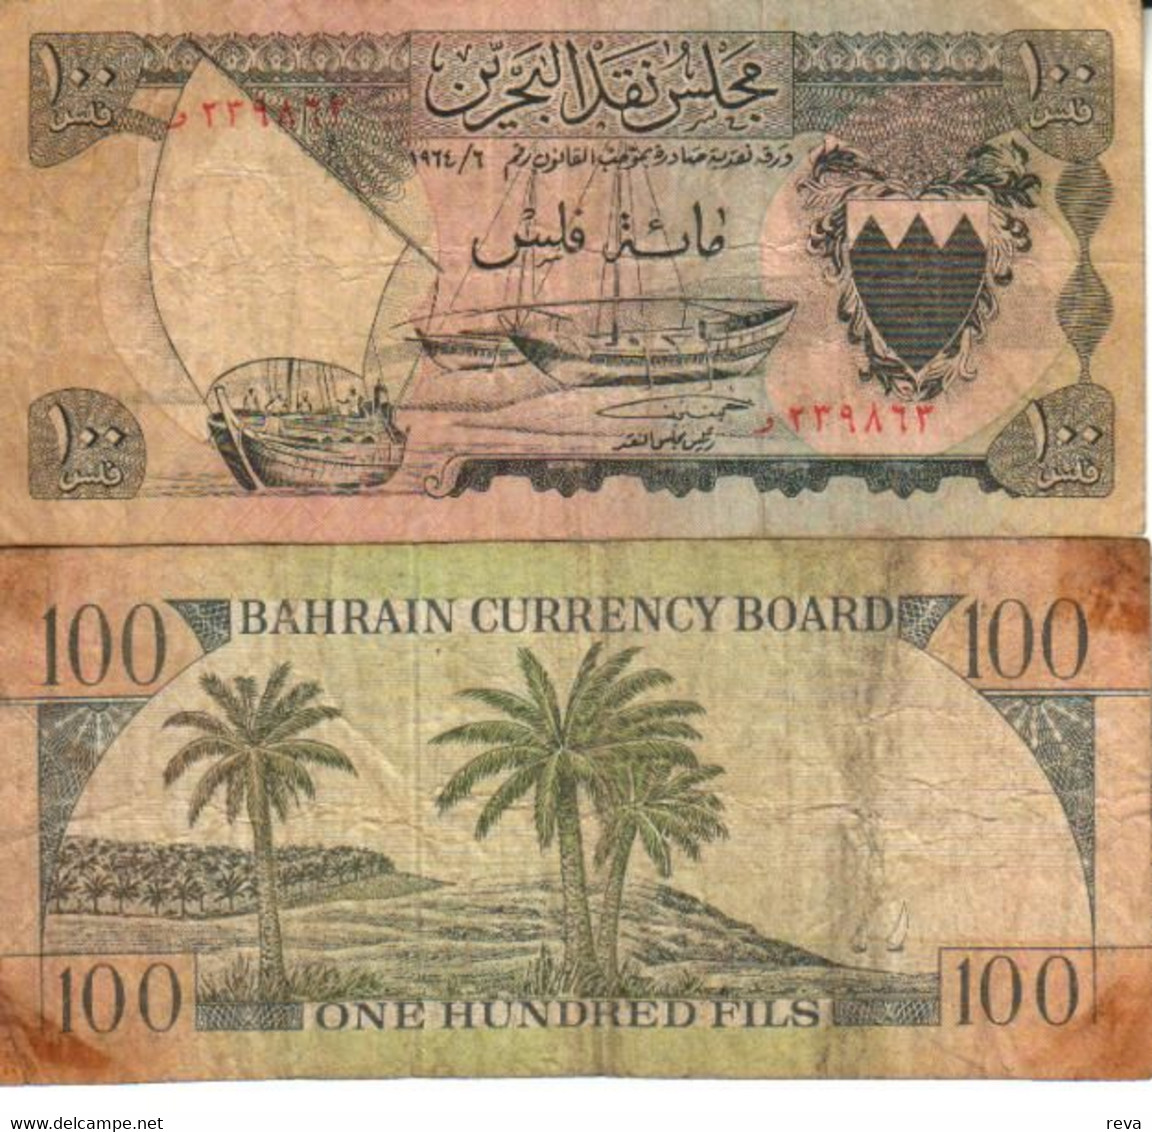 BAHRAIN 100 FILS  BOAT FRONT PALM TREE BACK DATED 1964 VF P.1a 1 YEAR TYPE READ DESCRIPTION CAREFULLY !!! - Bahreïn